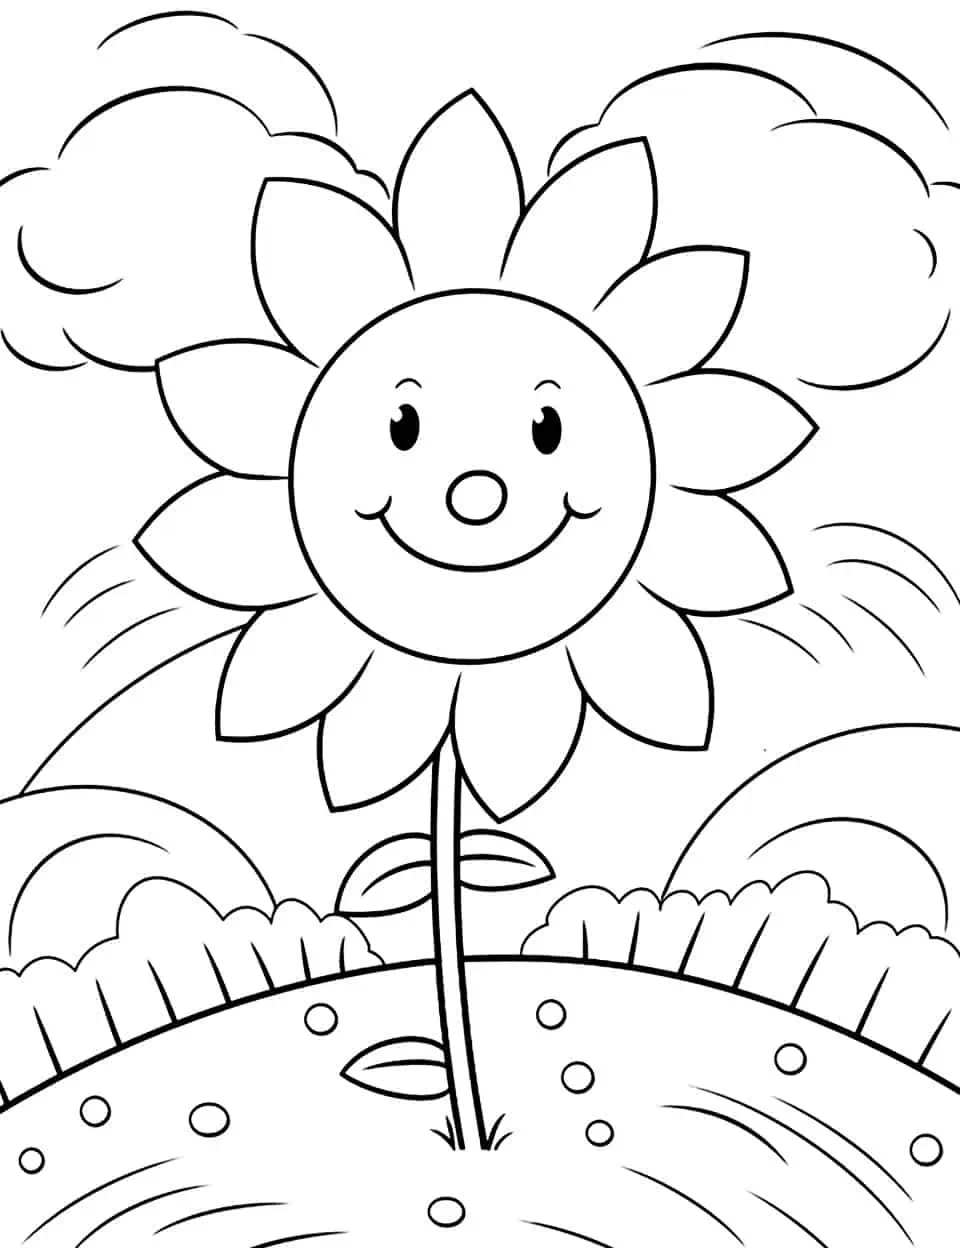 Cheerful Spring Sun Coloring Page - A large, smiling sun shining over a spring landscape for young children.